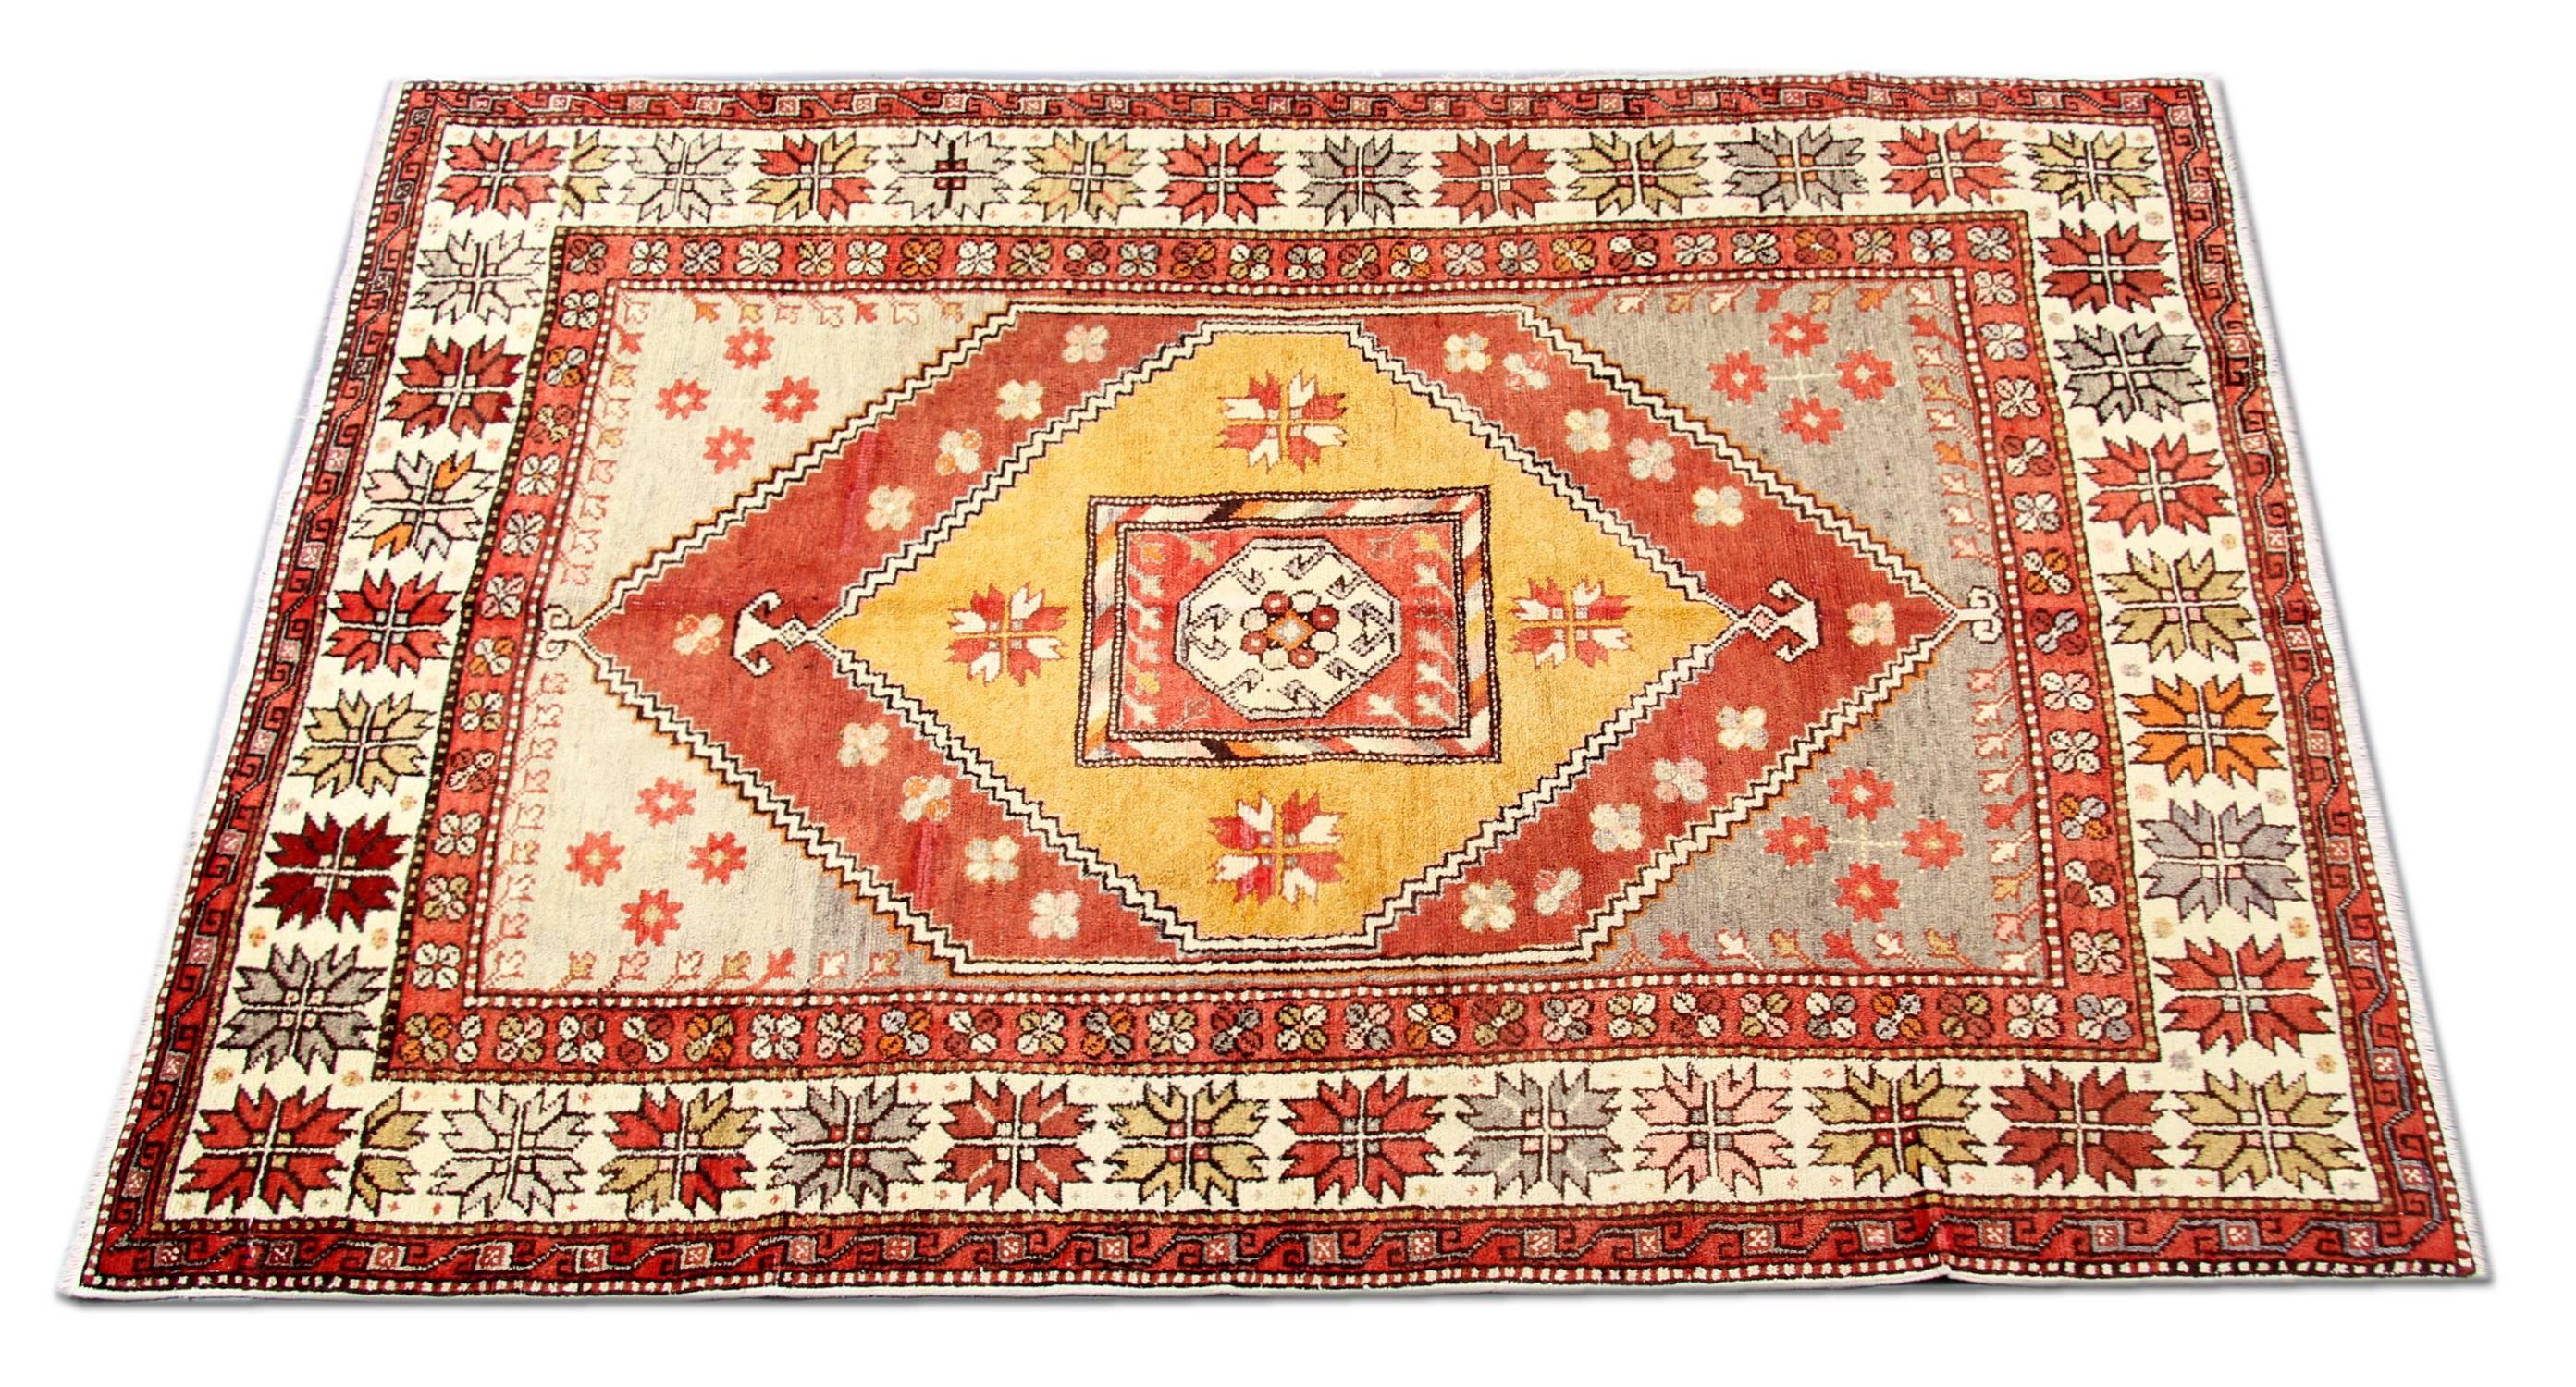 A rare find. This antique rug yellow is a beautiful old gold ground handmade carpet runner in excellent condition. luxury rug with full pile everywhere, finely woven and full of charm. Patterned rug with all-natural colours and vegetable dyed the